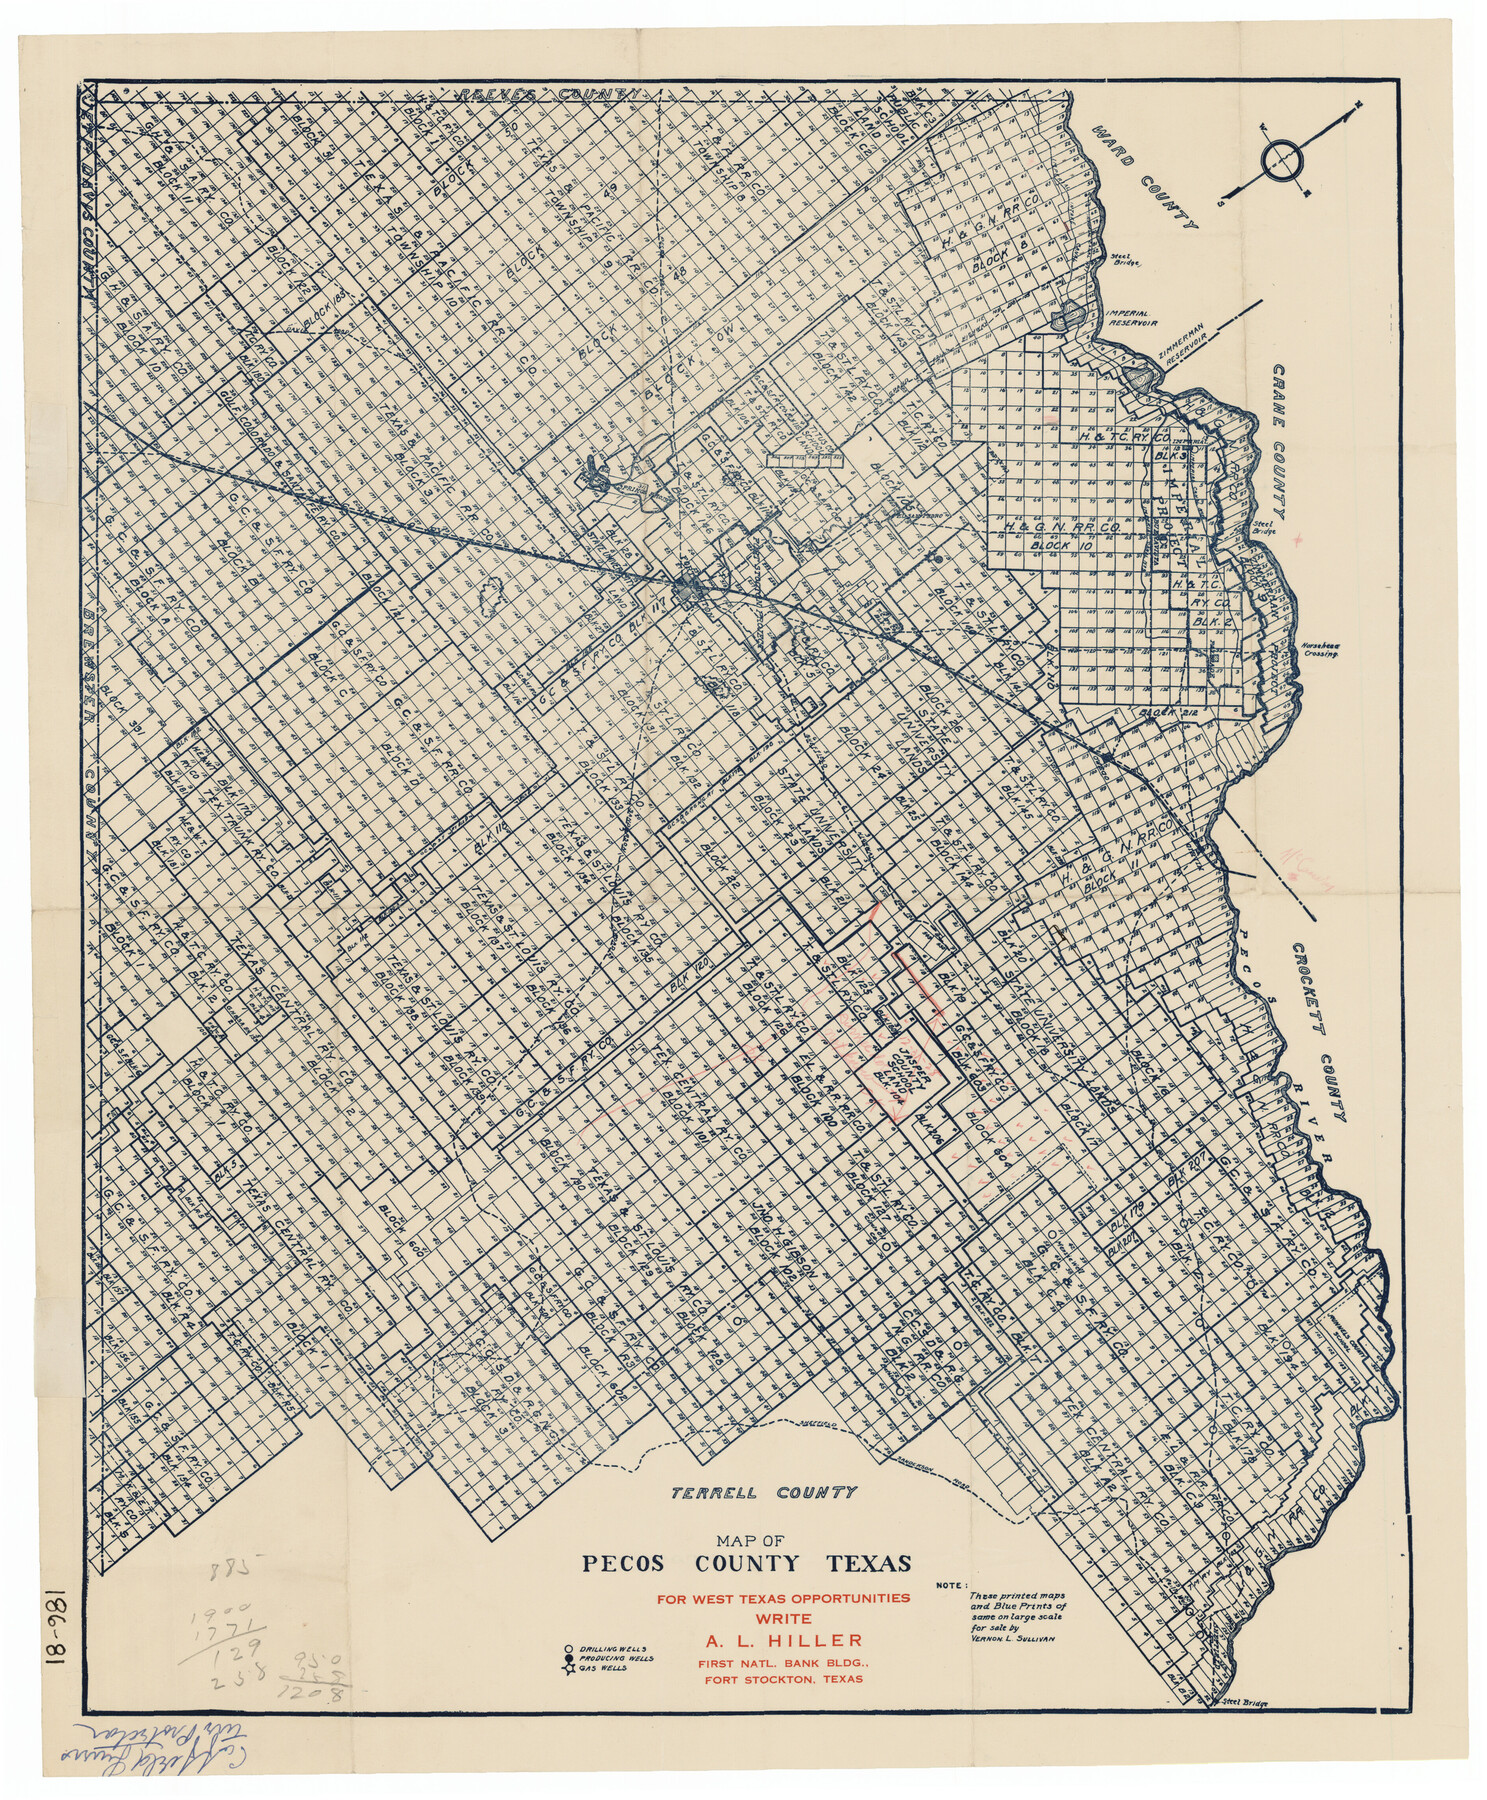 91573, Map of Pecos County, Texas, Twichell Survey Records